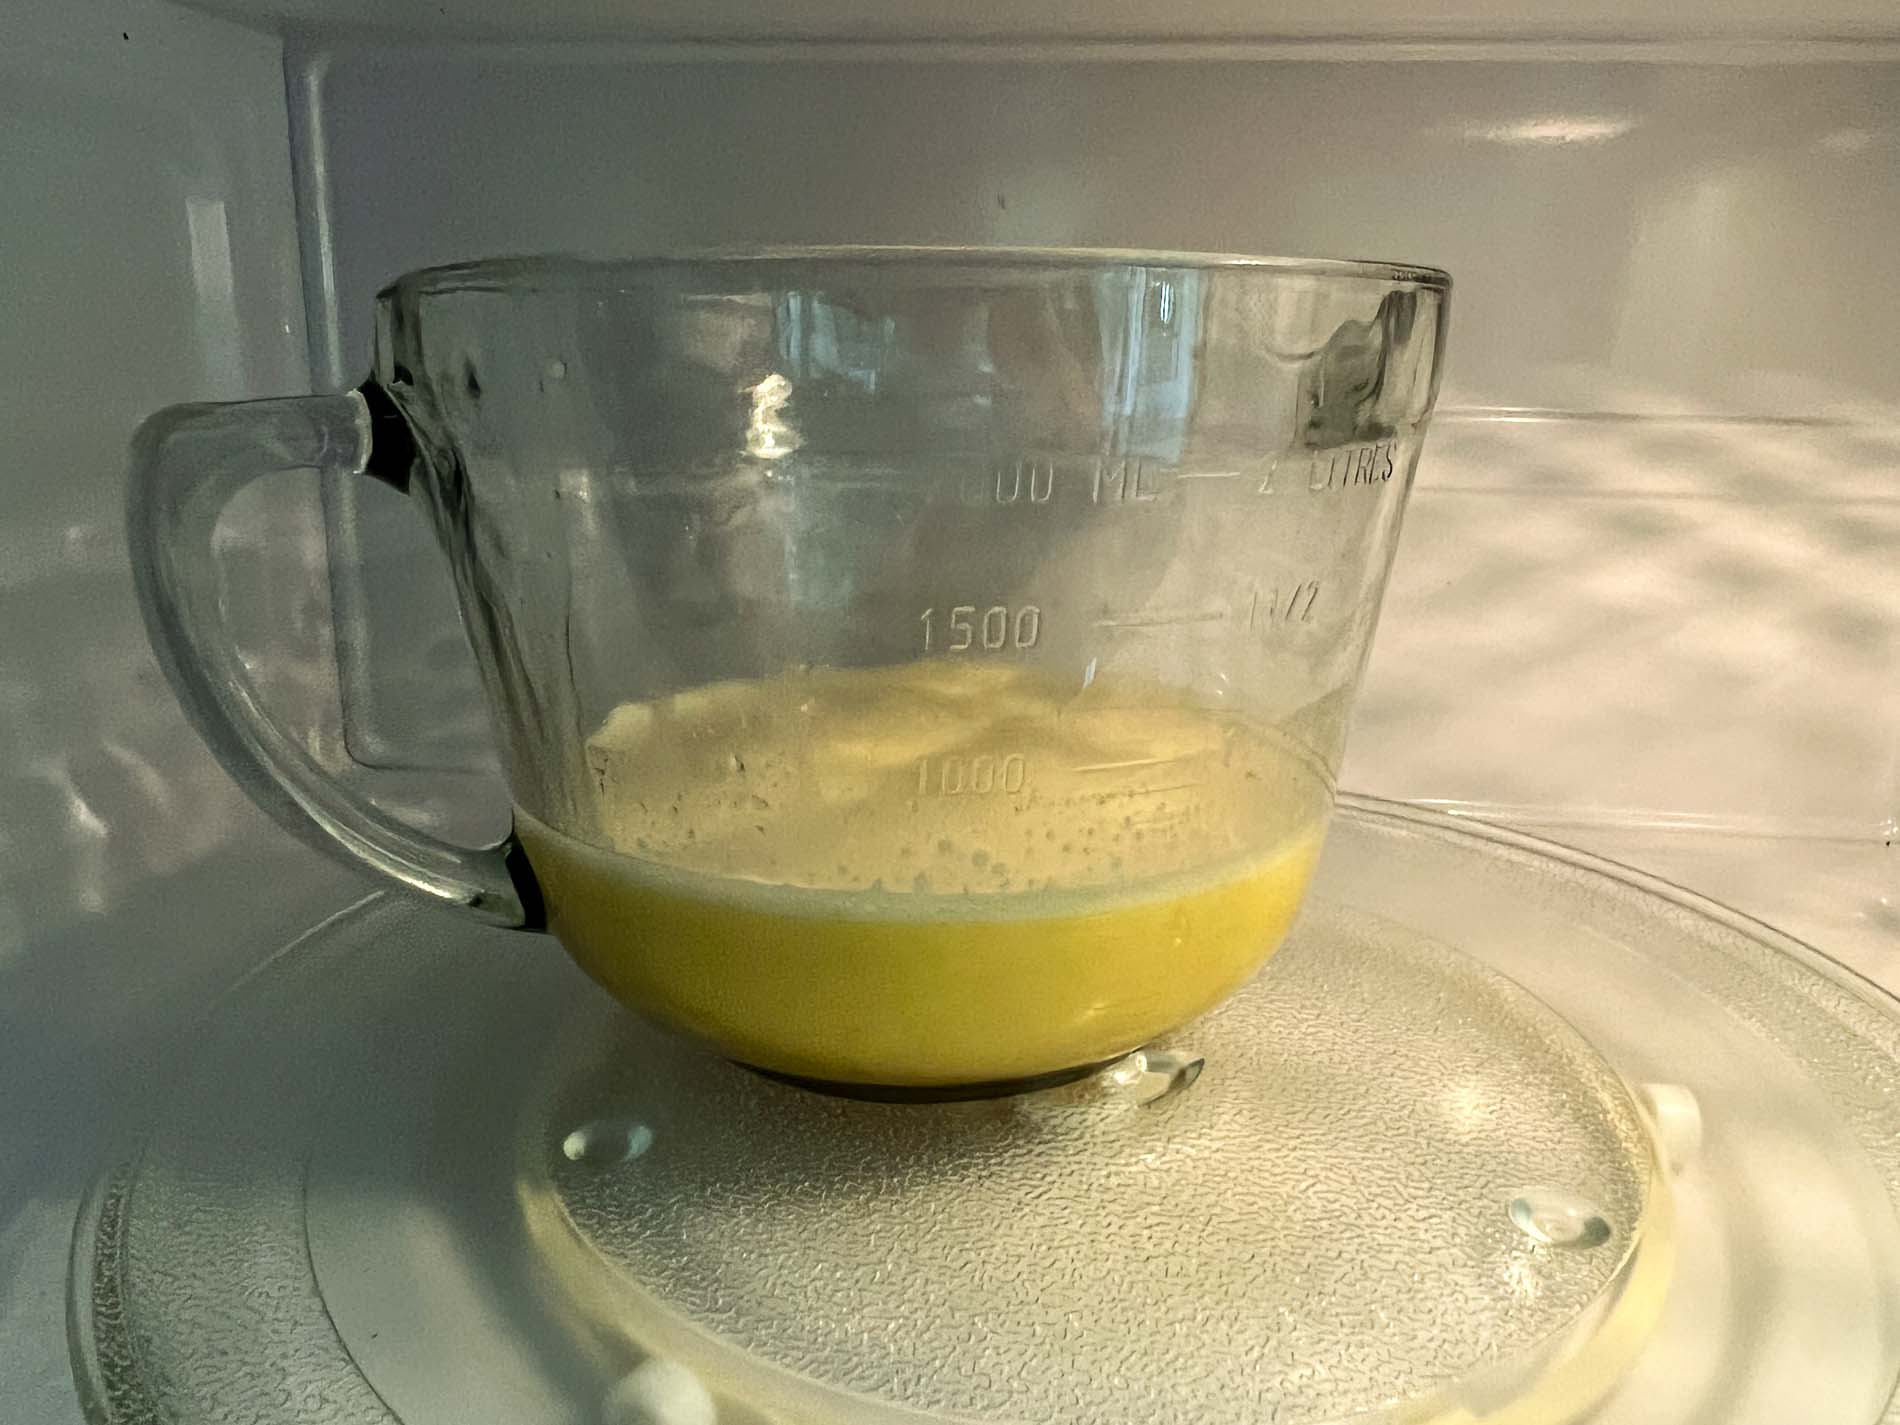  cooking curd mixture in the microwave